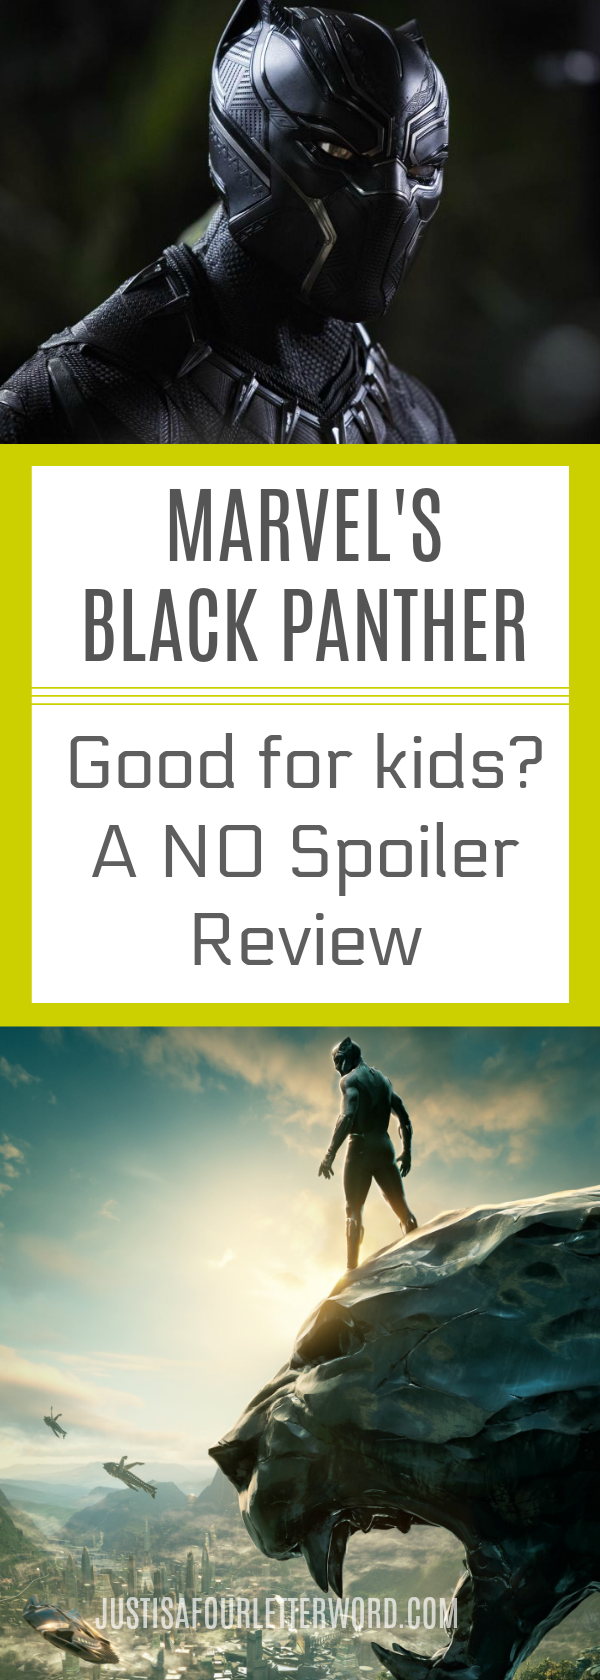 See if you think Marvel Black Panther Movie good for kids with this no-spoiler movie review for parents.